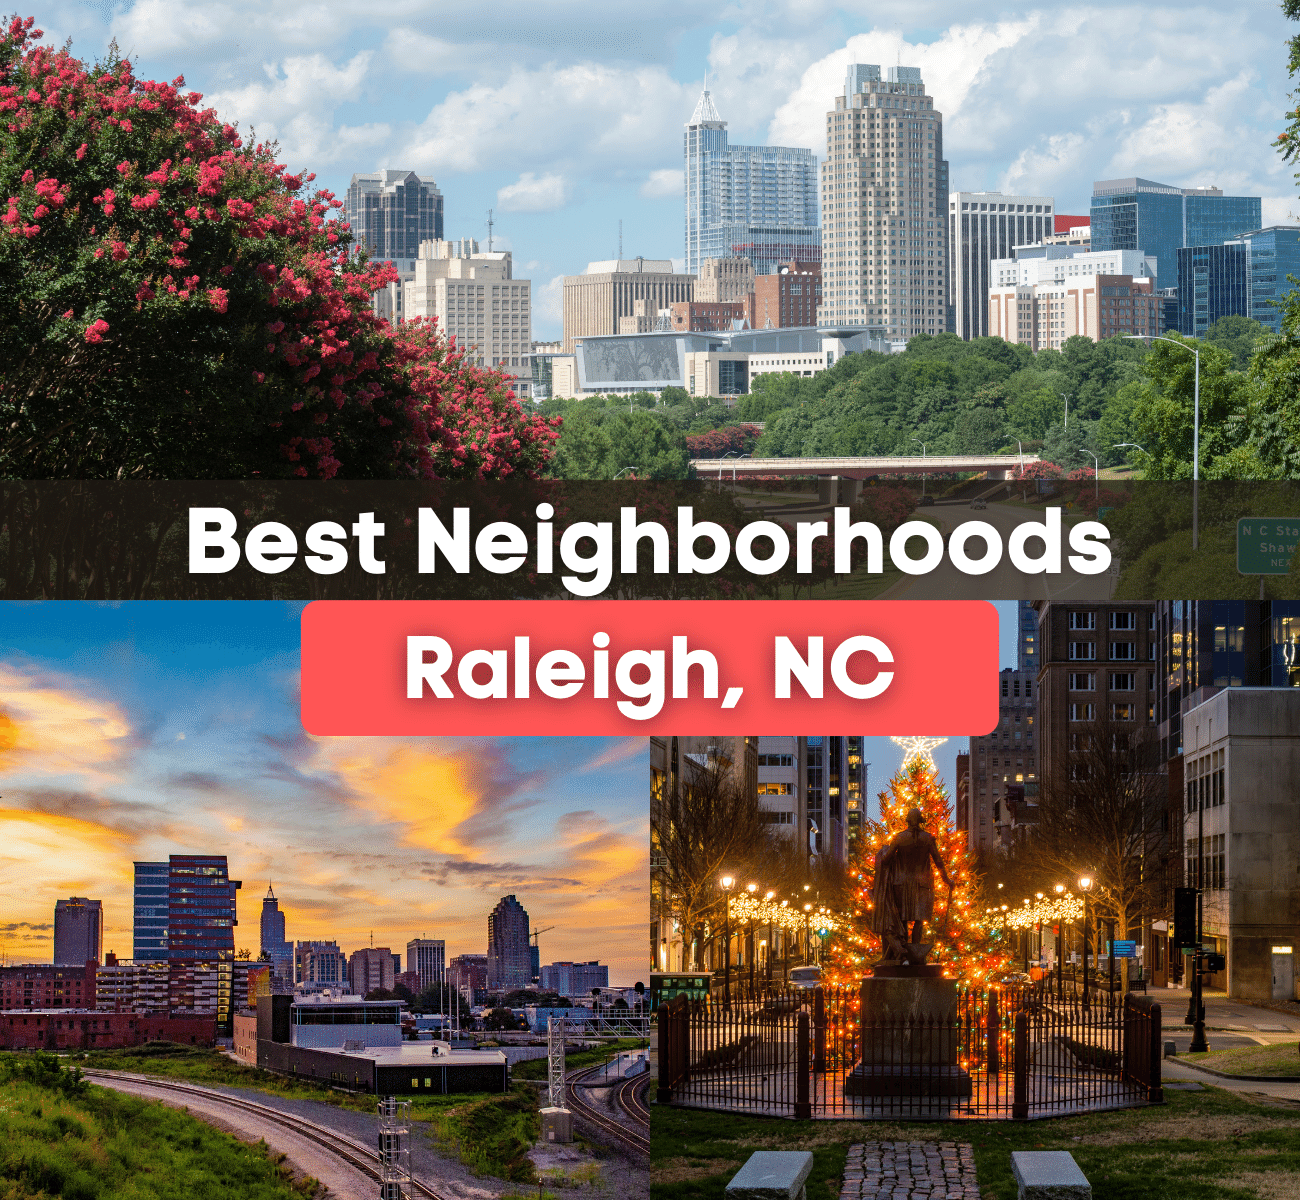 Best Neighborhoods in Raleigh, NC - Here are the best places to live in Raleigh